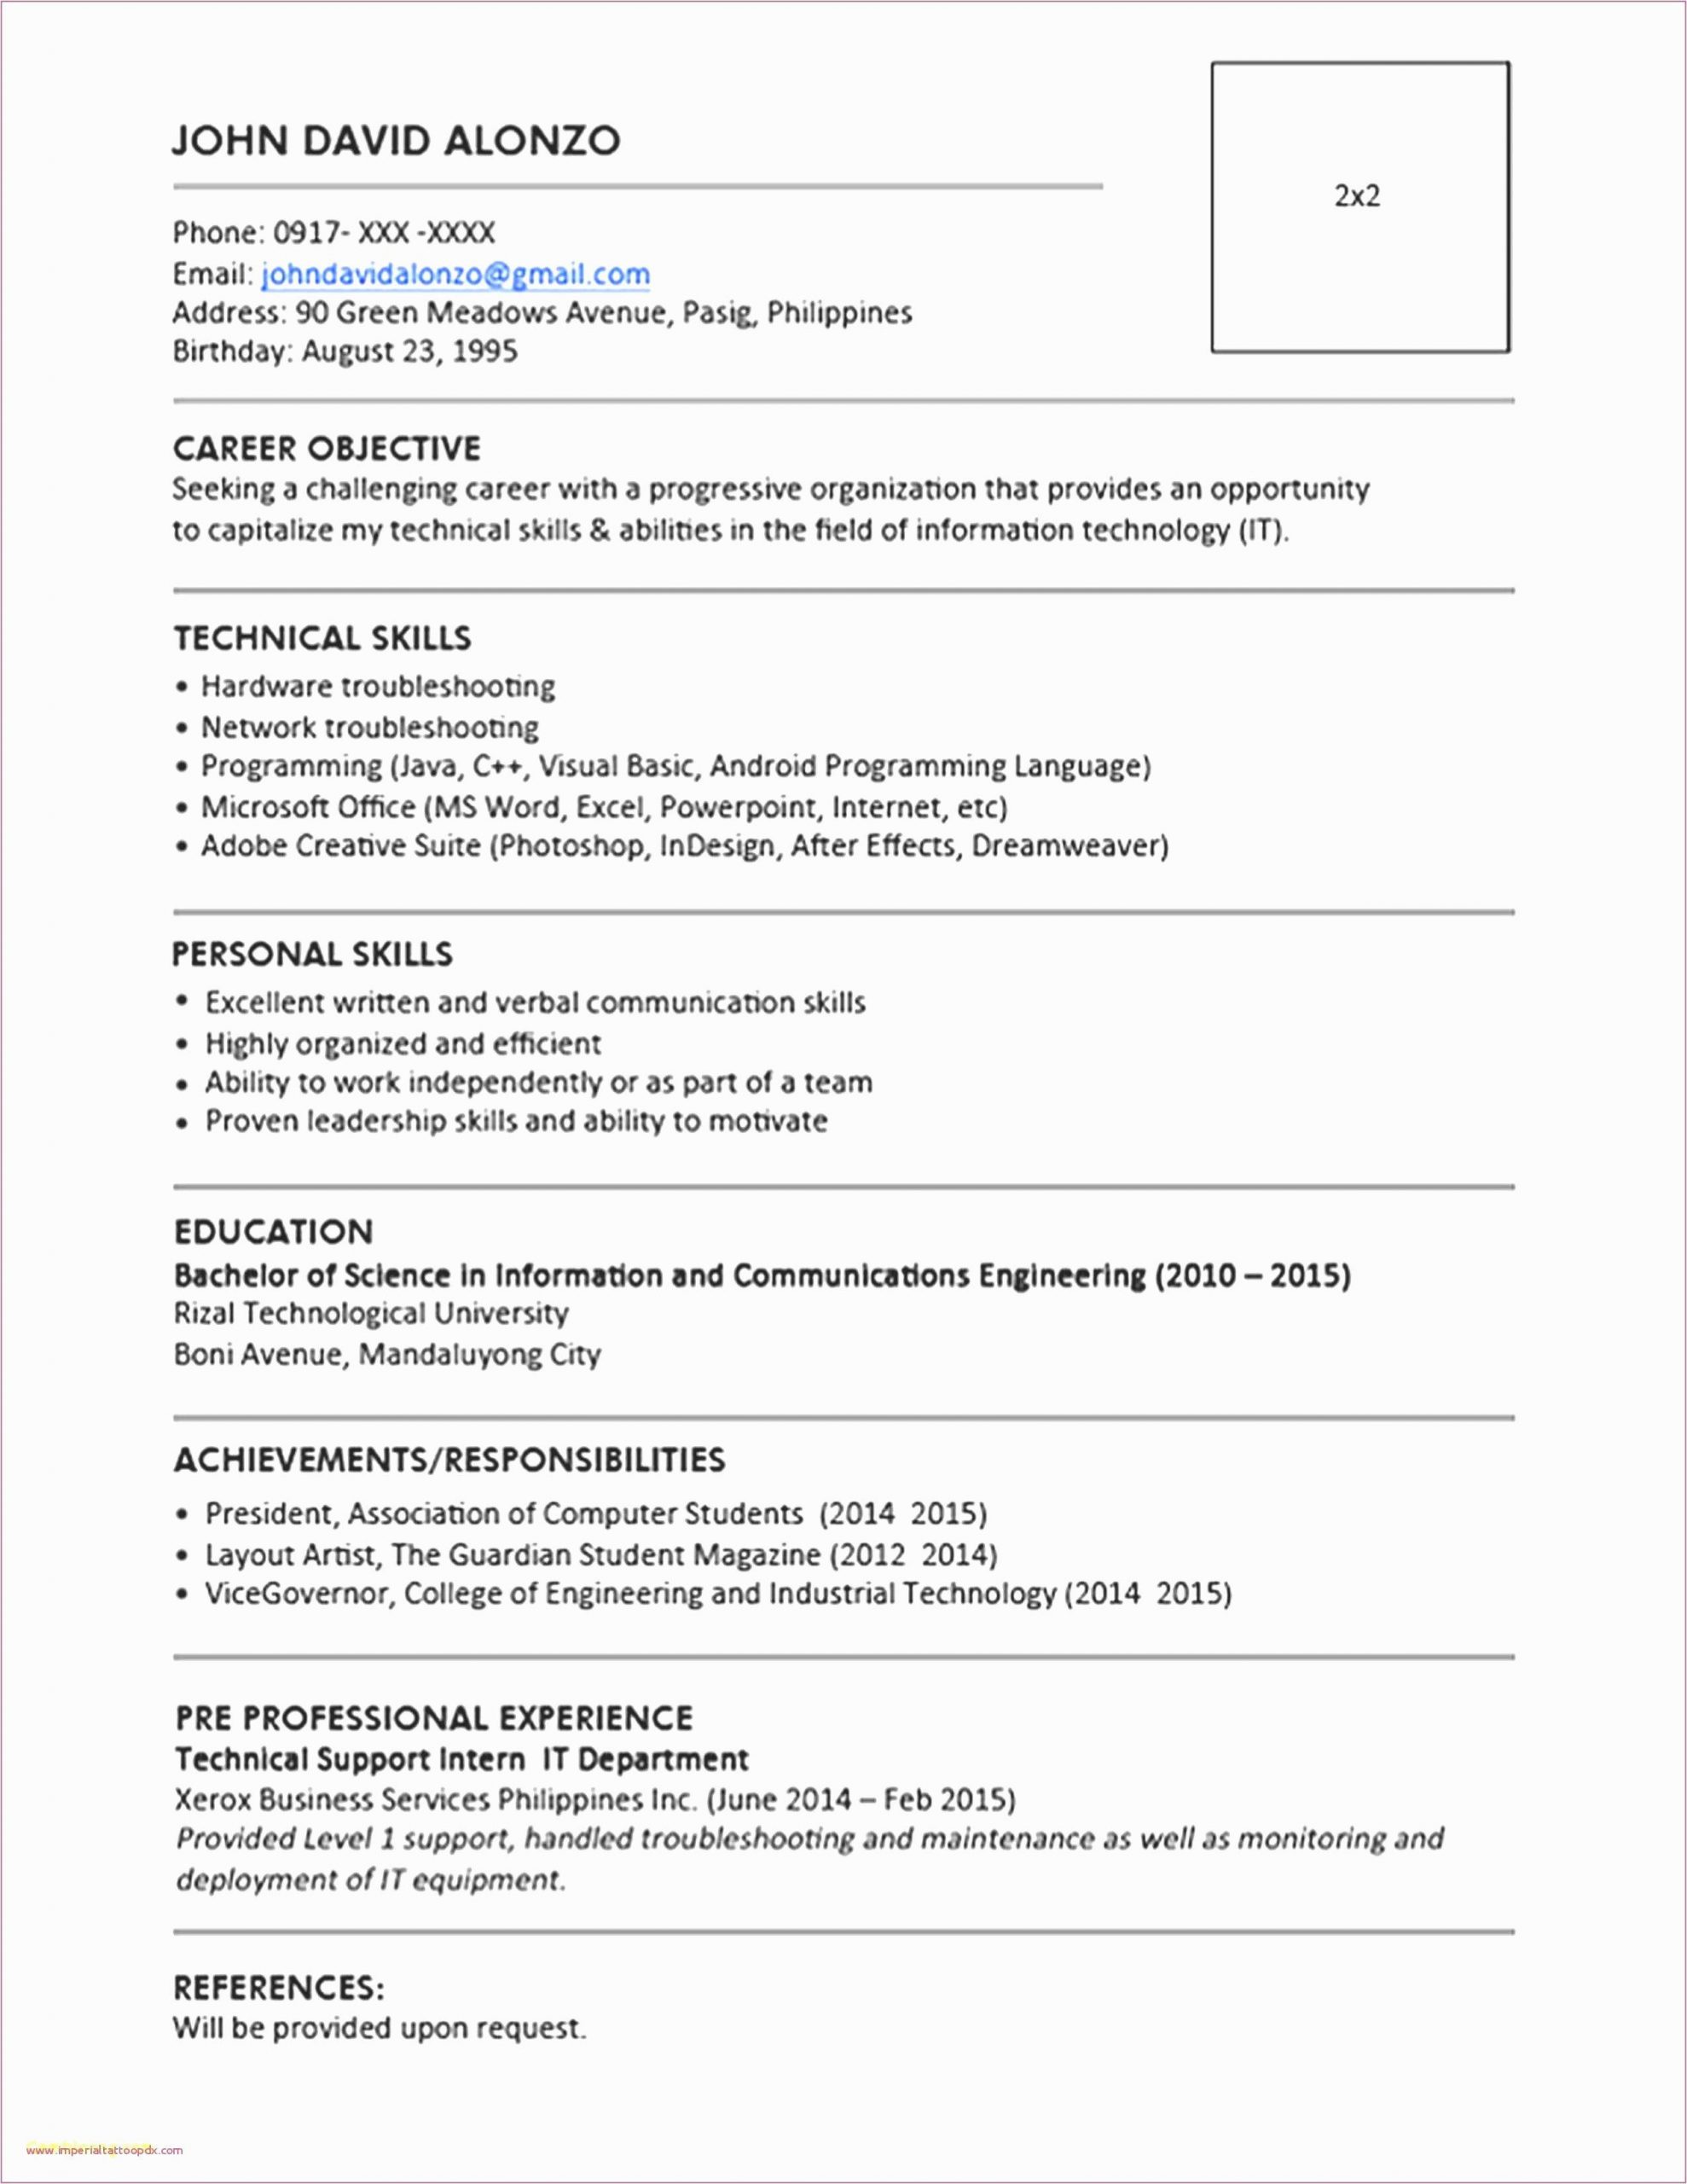 resume template with 2x2 picture